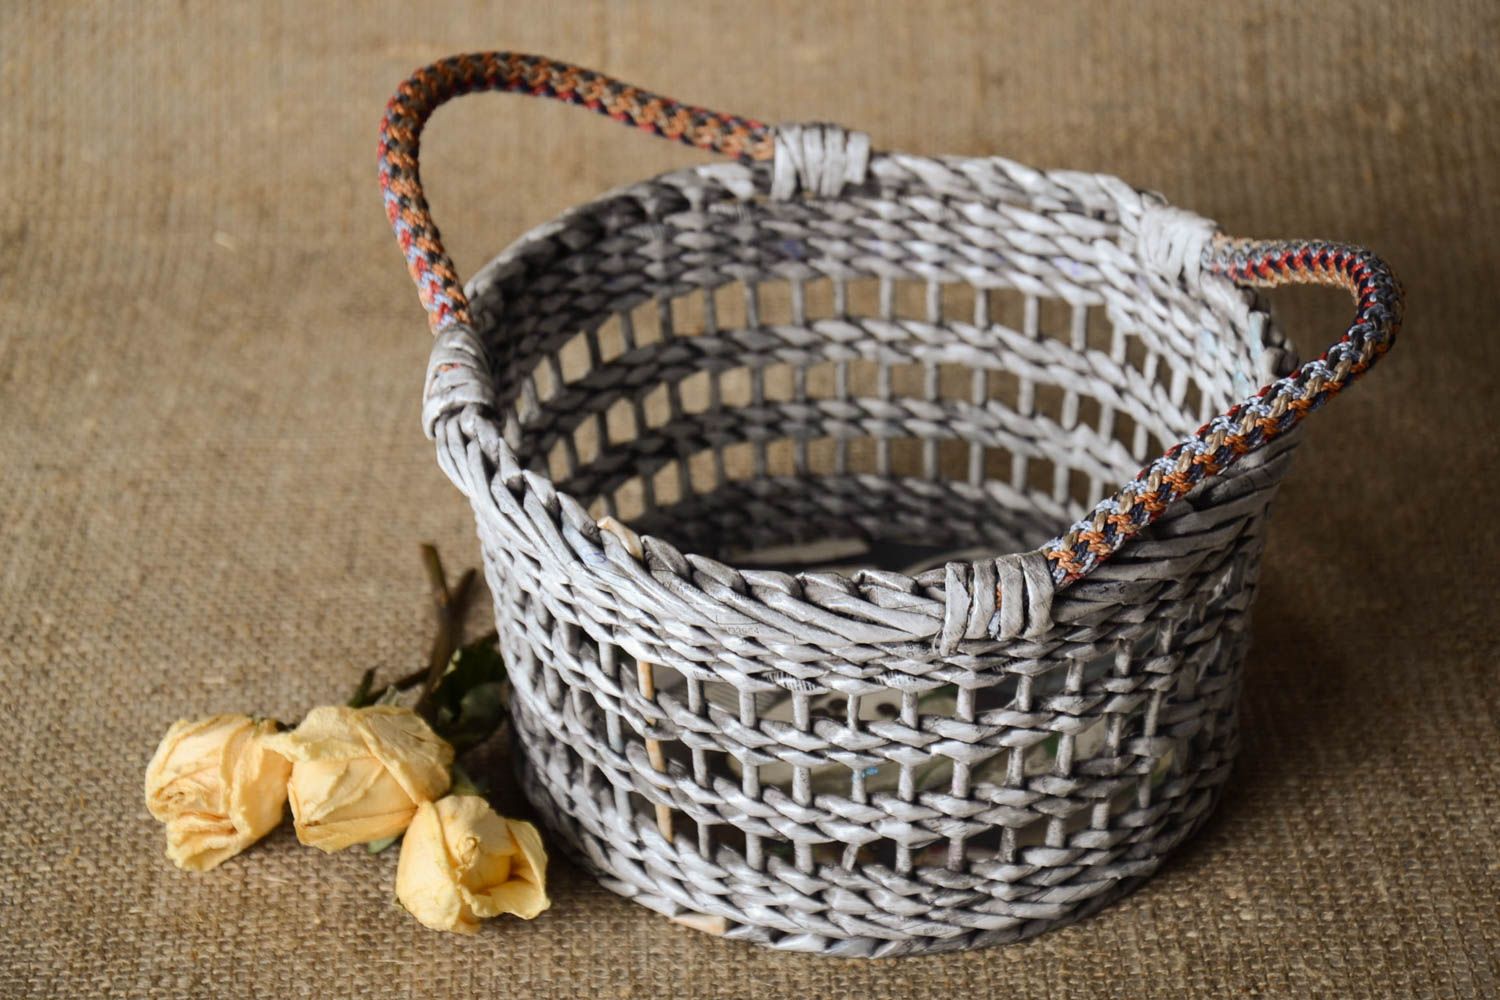 Unusual handmade woven paper basket newspaper craft room decor ideas small gifts photo 1